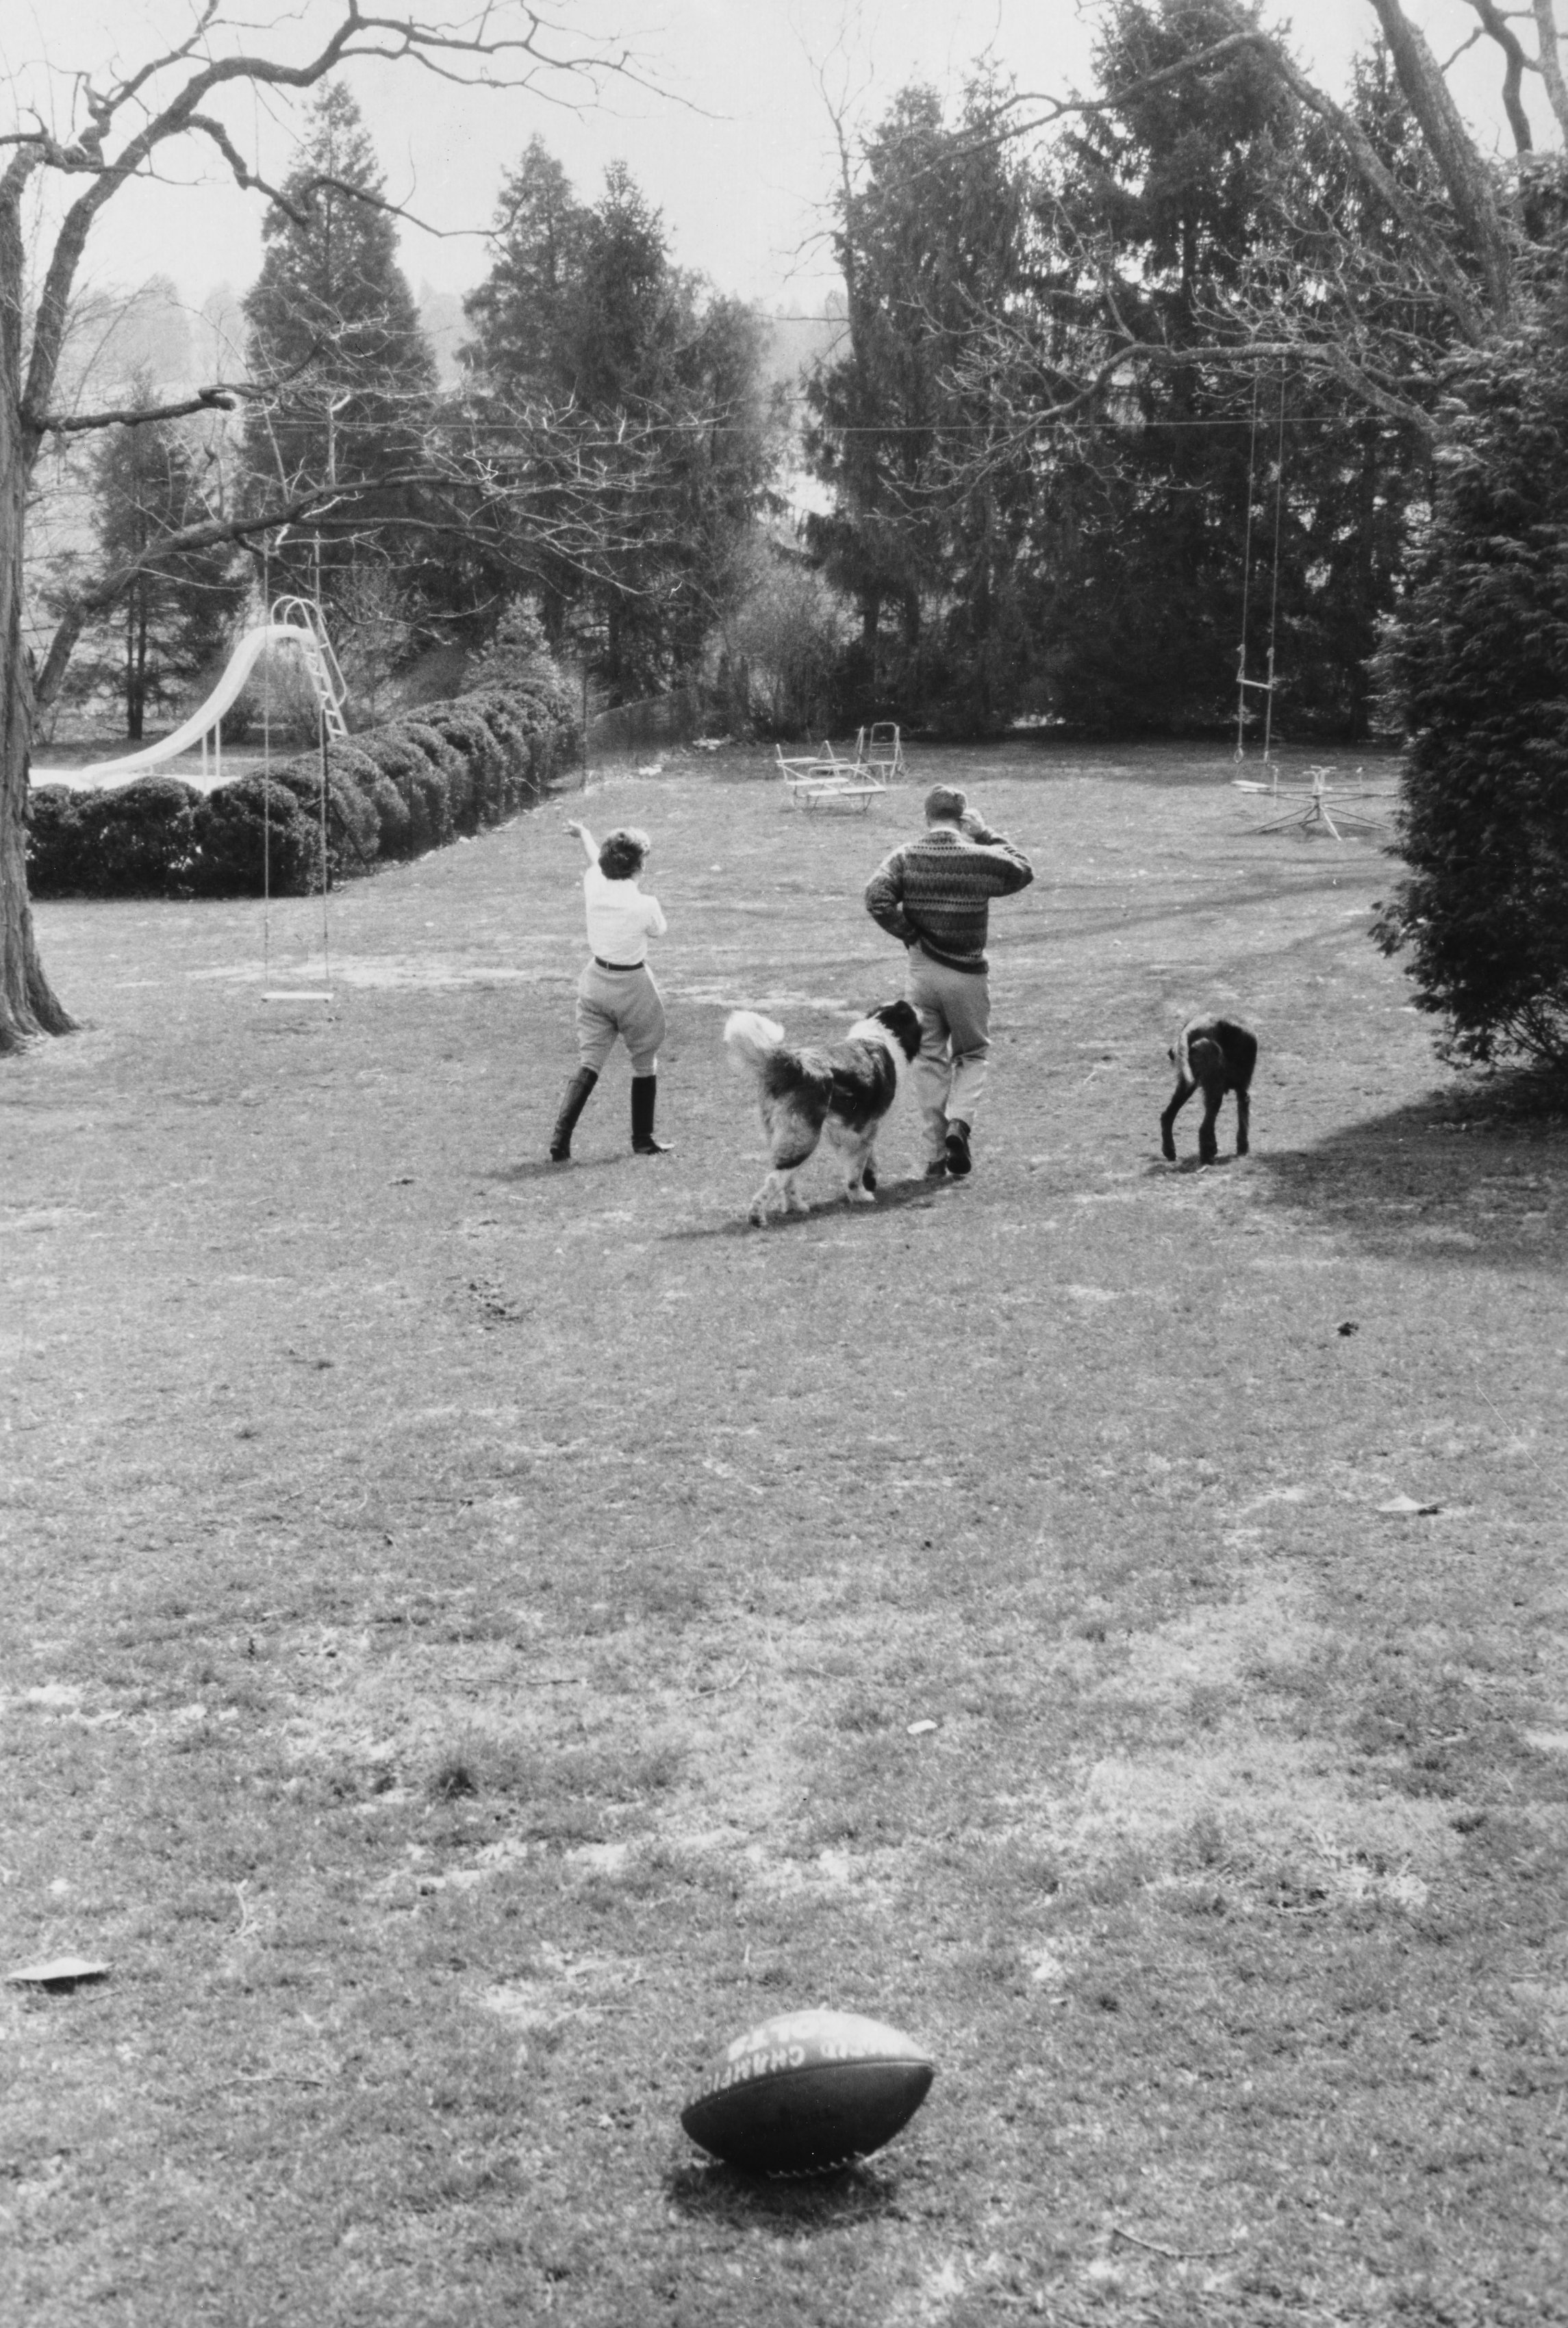 Robert F. Kennedy with His Wife and Dogs, Hyannis Port, Massachusetts